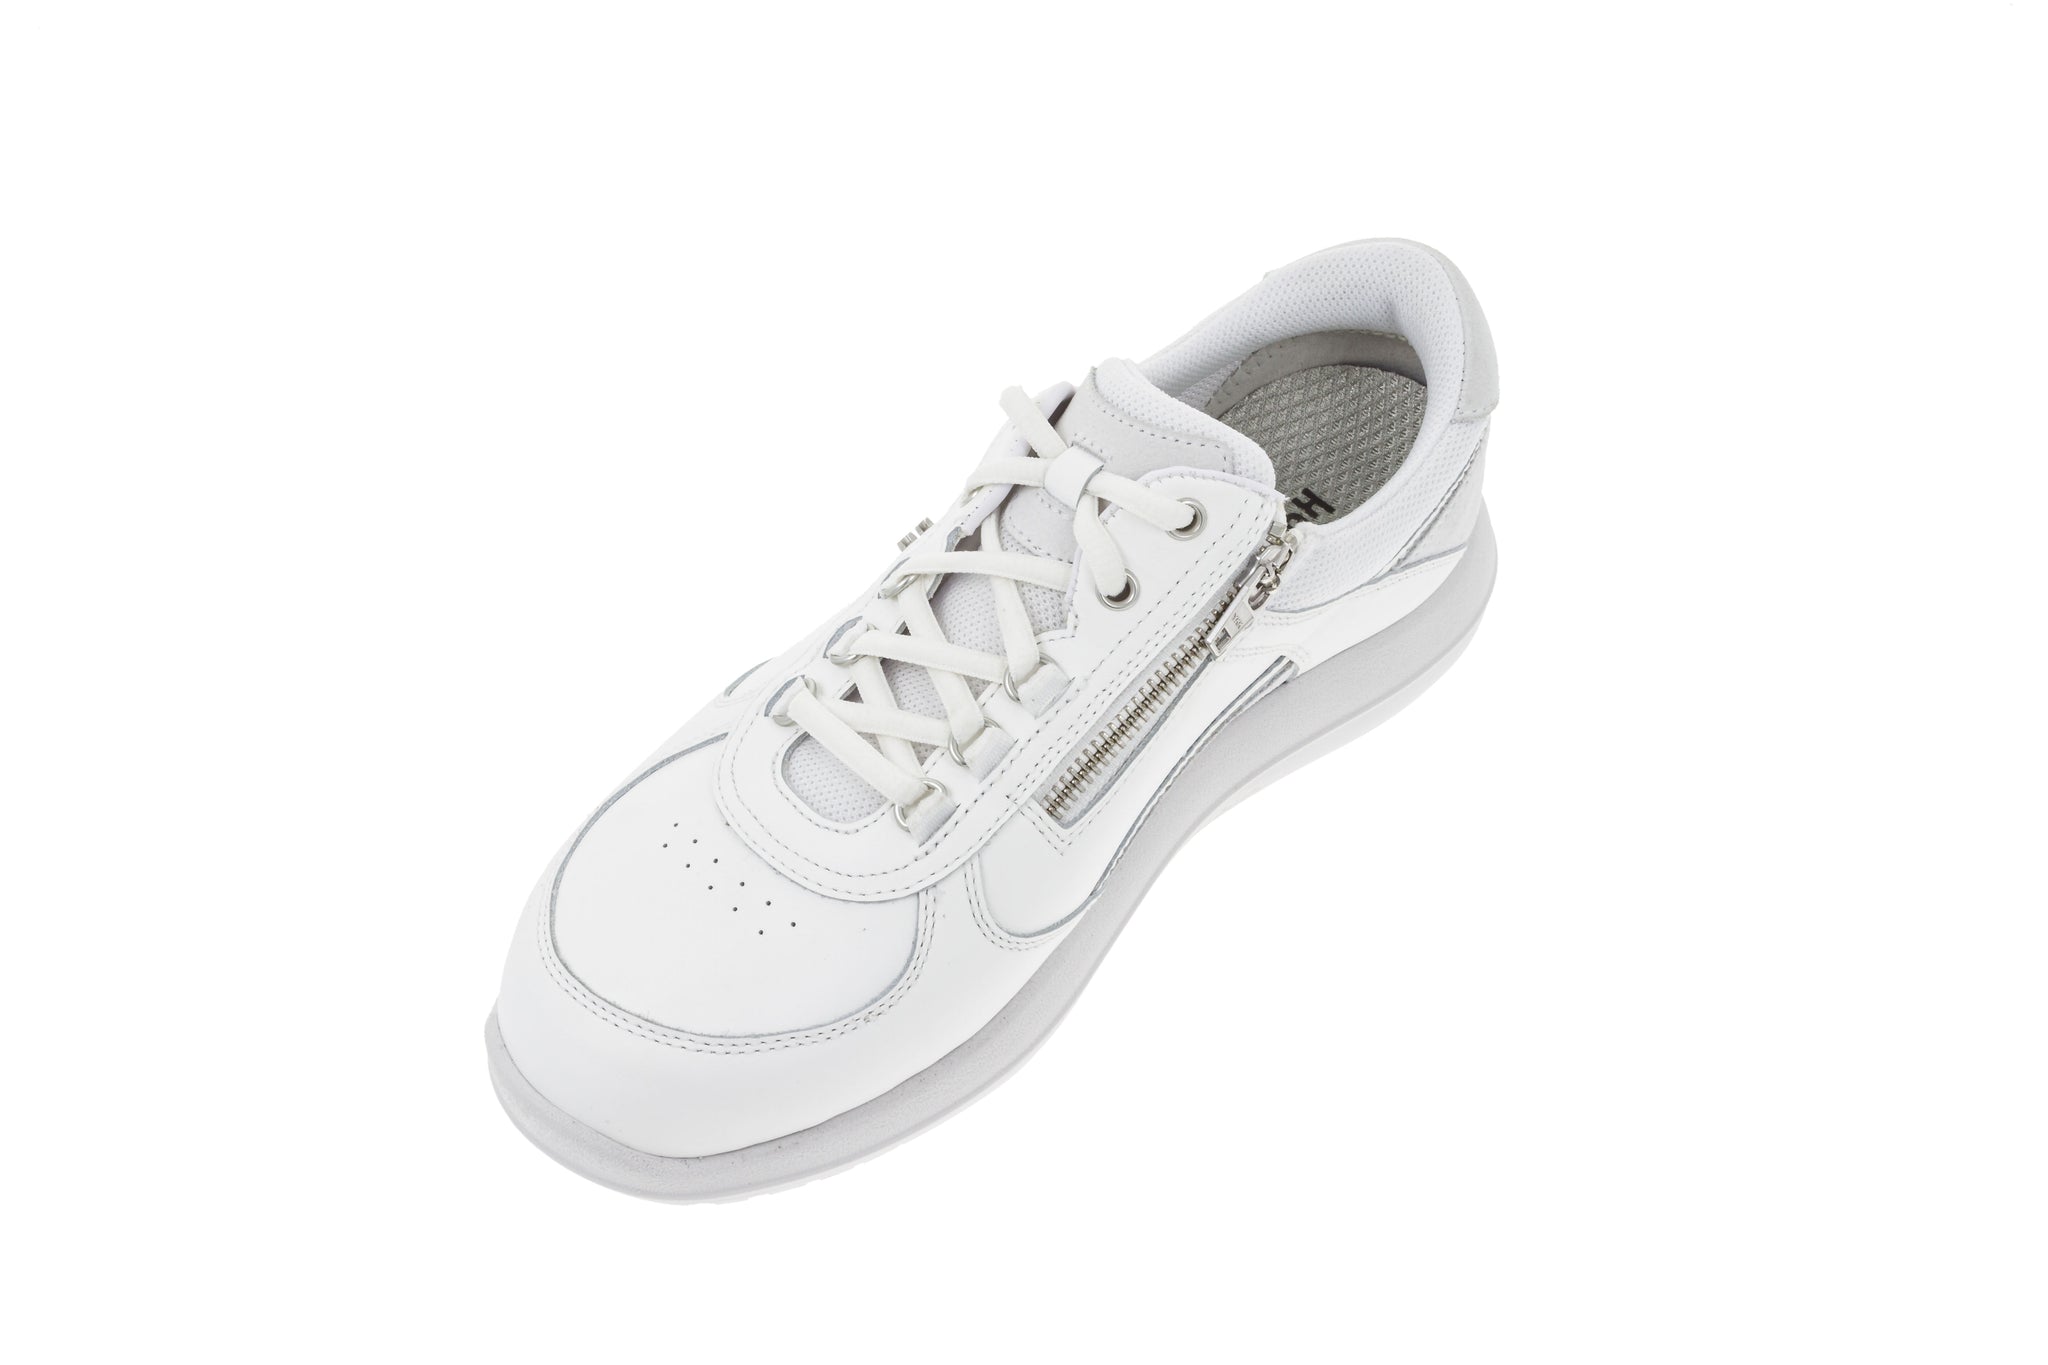 kybun Rolle USA White: Pain for Relief Swiss Air-Cushion – Shoe store online kybun